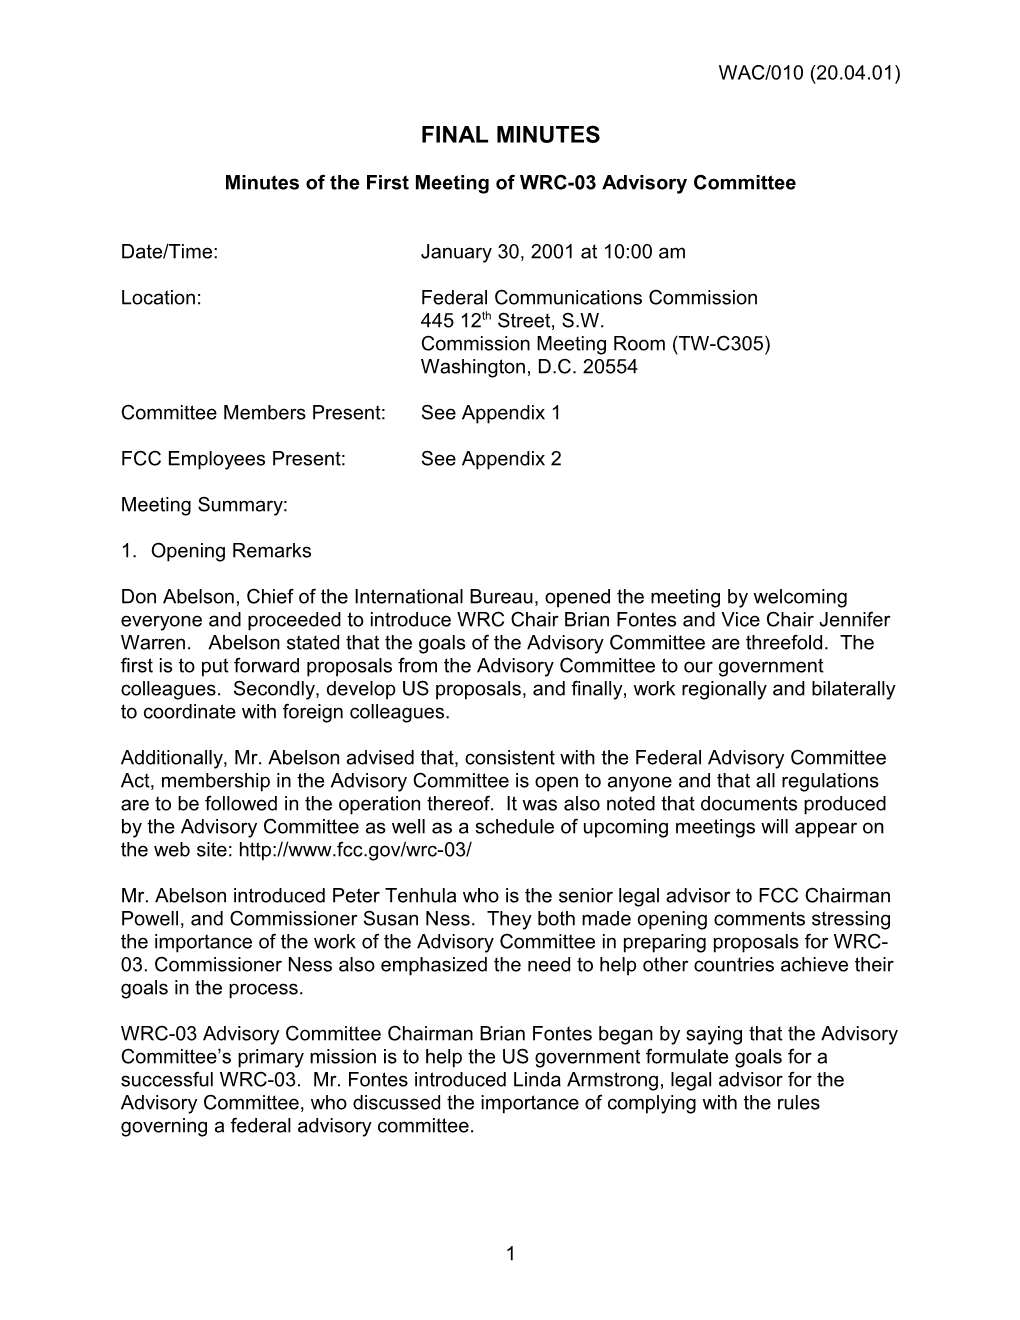 Minutes of the First Meeting of WRC-03 Advisory Committee